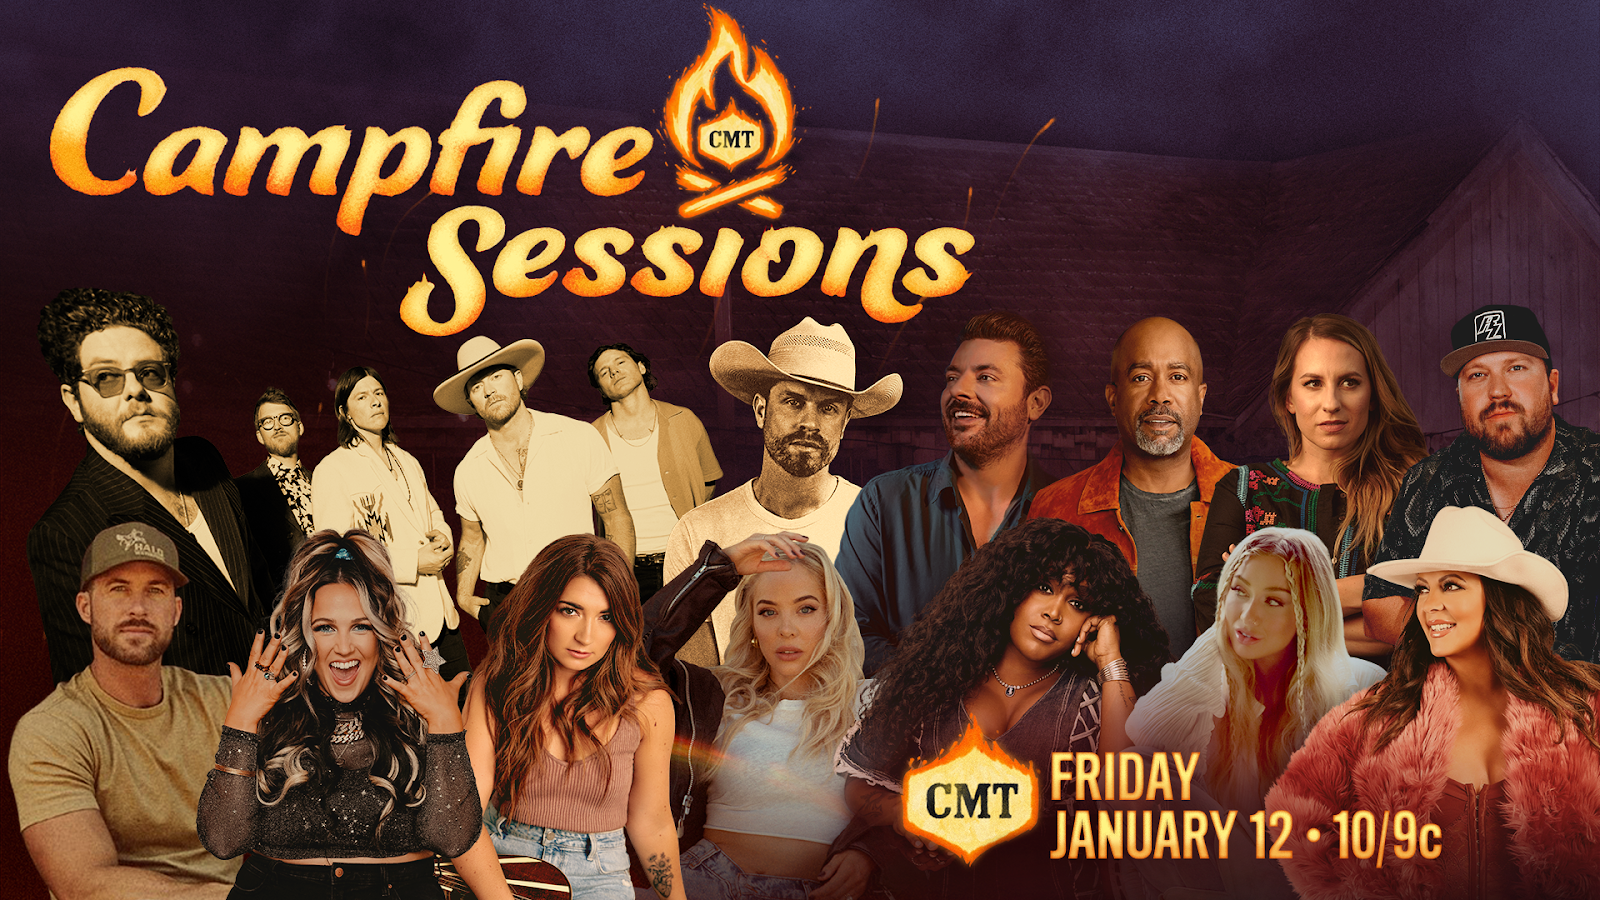 CMT CAMPFIRE SESSIONS Season 3 to premiere Friday, January 12th at 10p9c